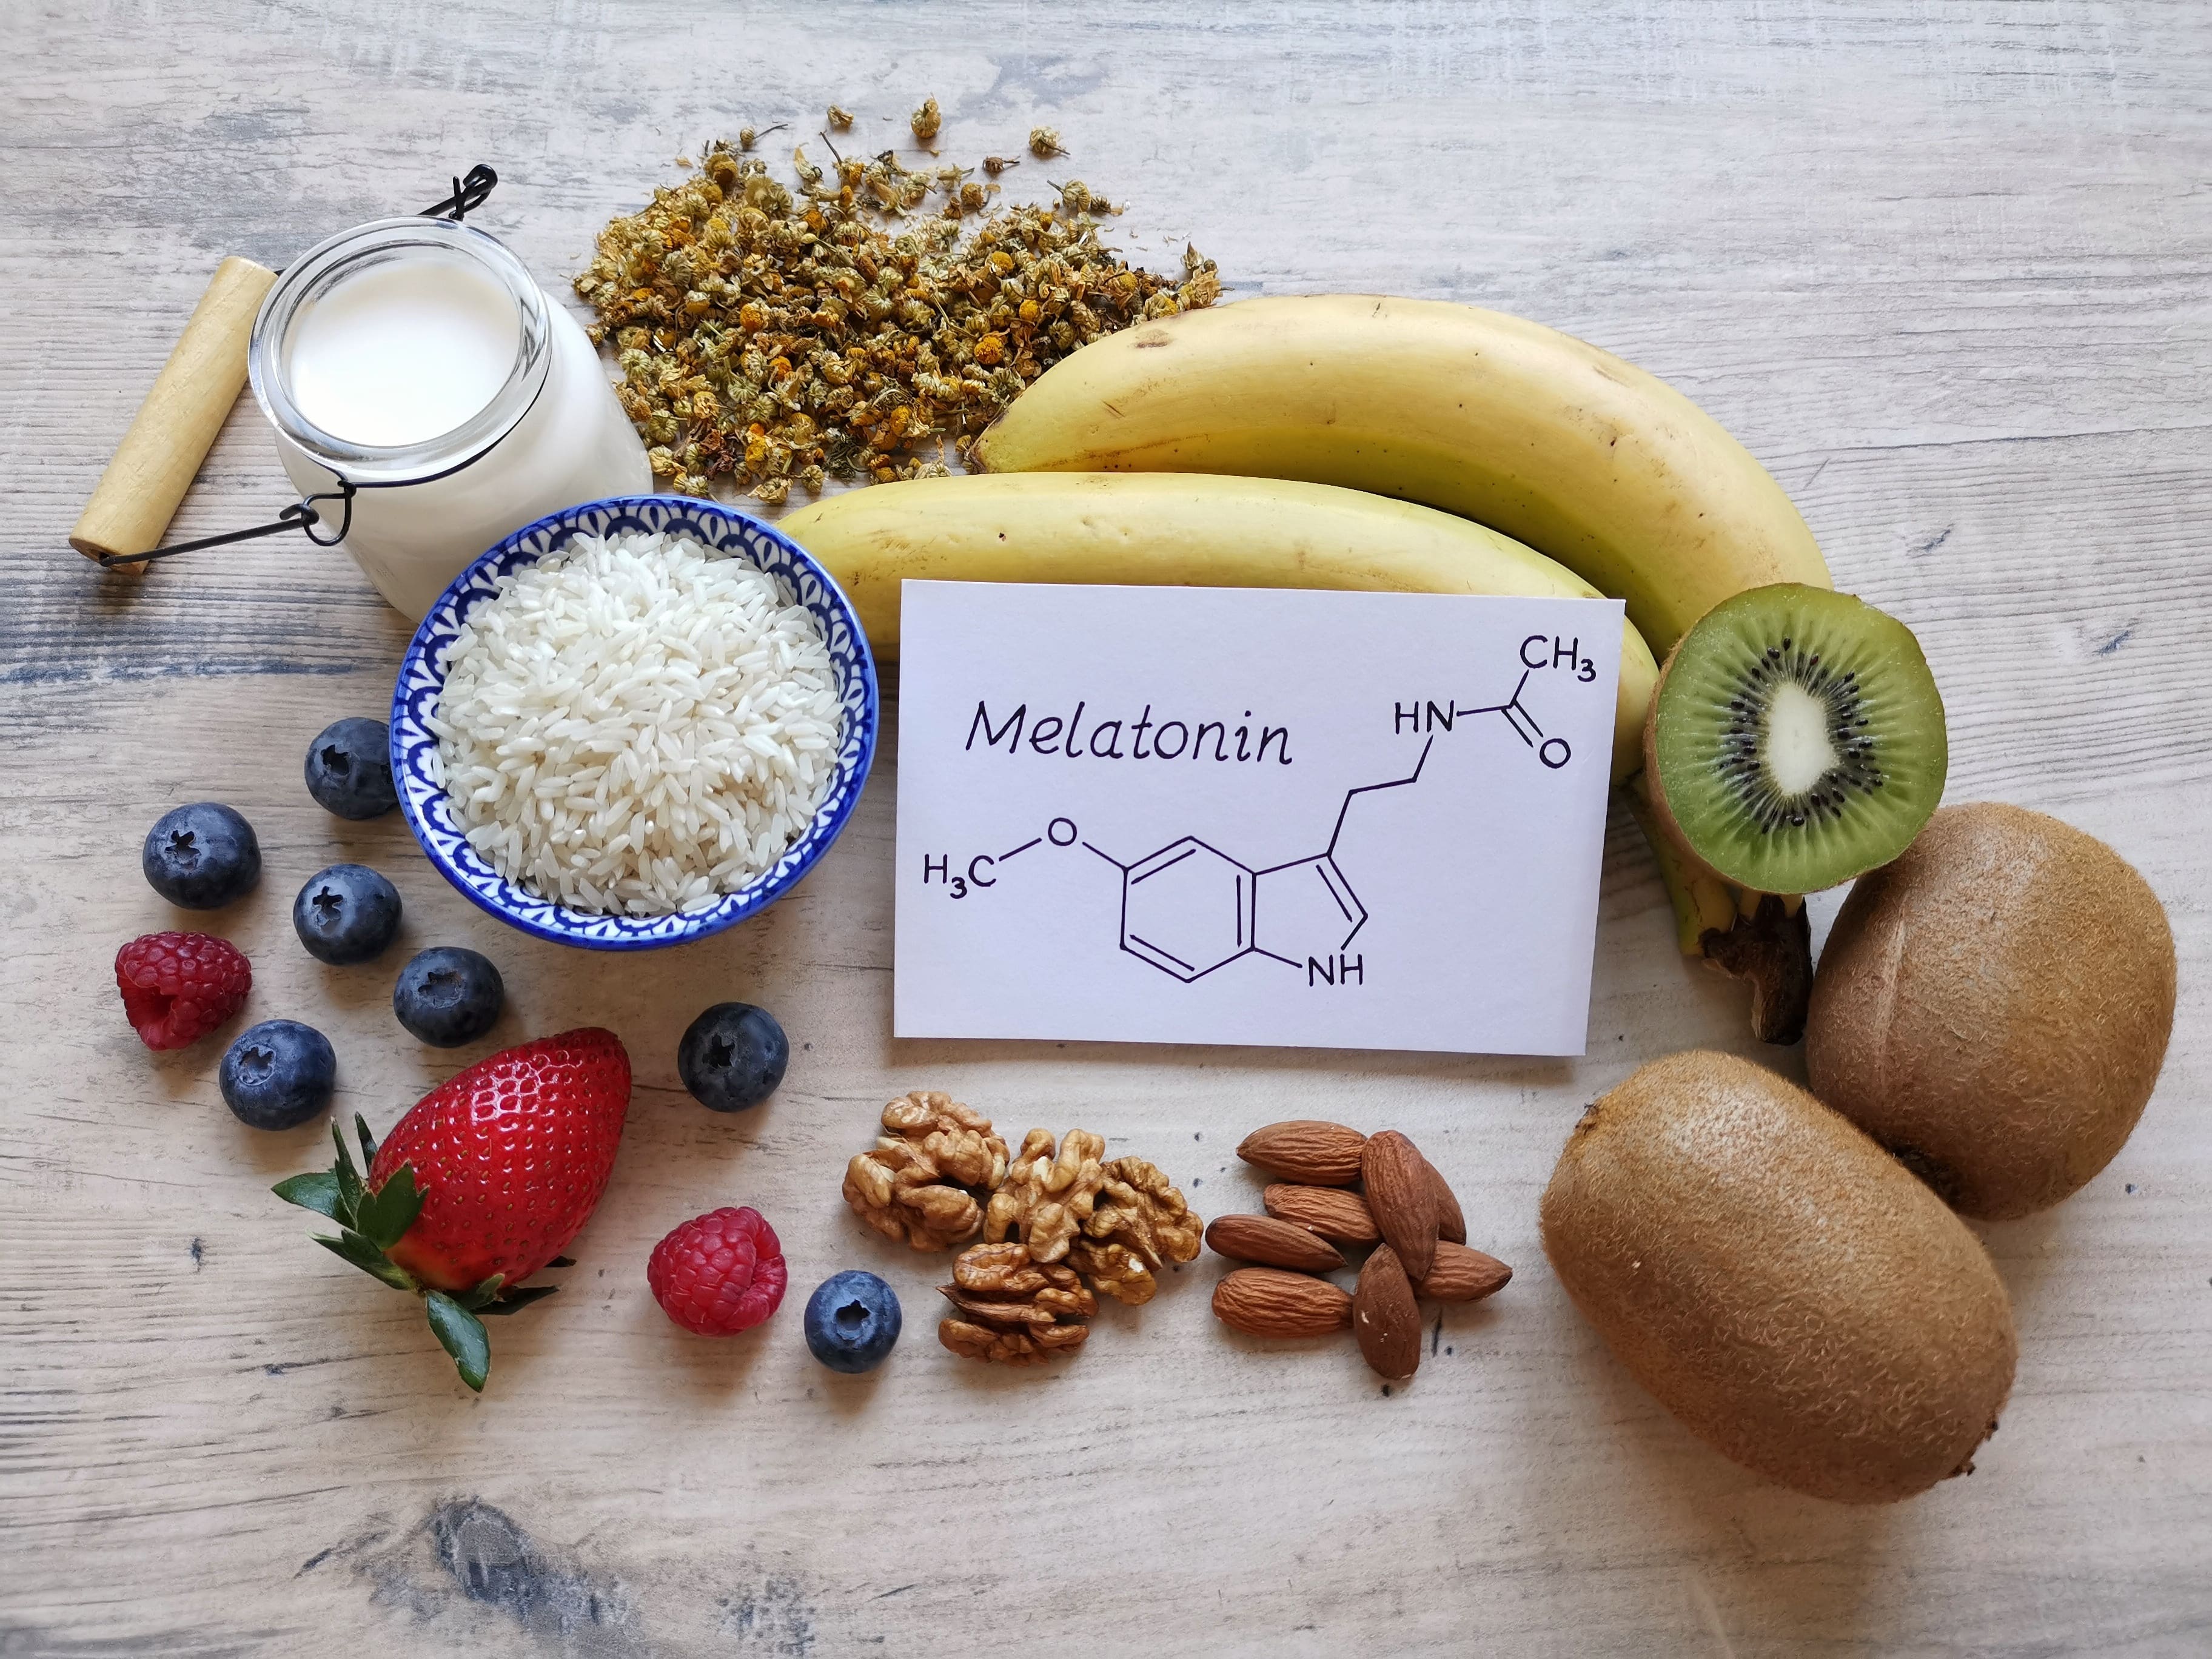 A collection of melatonin-rich foods that could help you sleep including kiwis, bananas, blueberries, strawberries and more